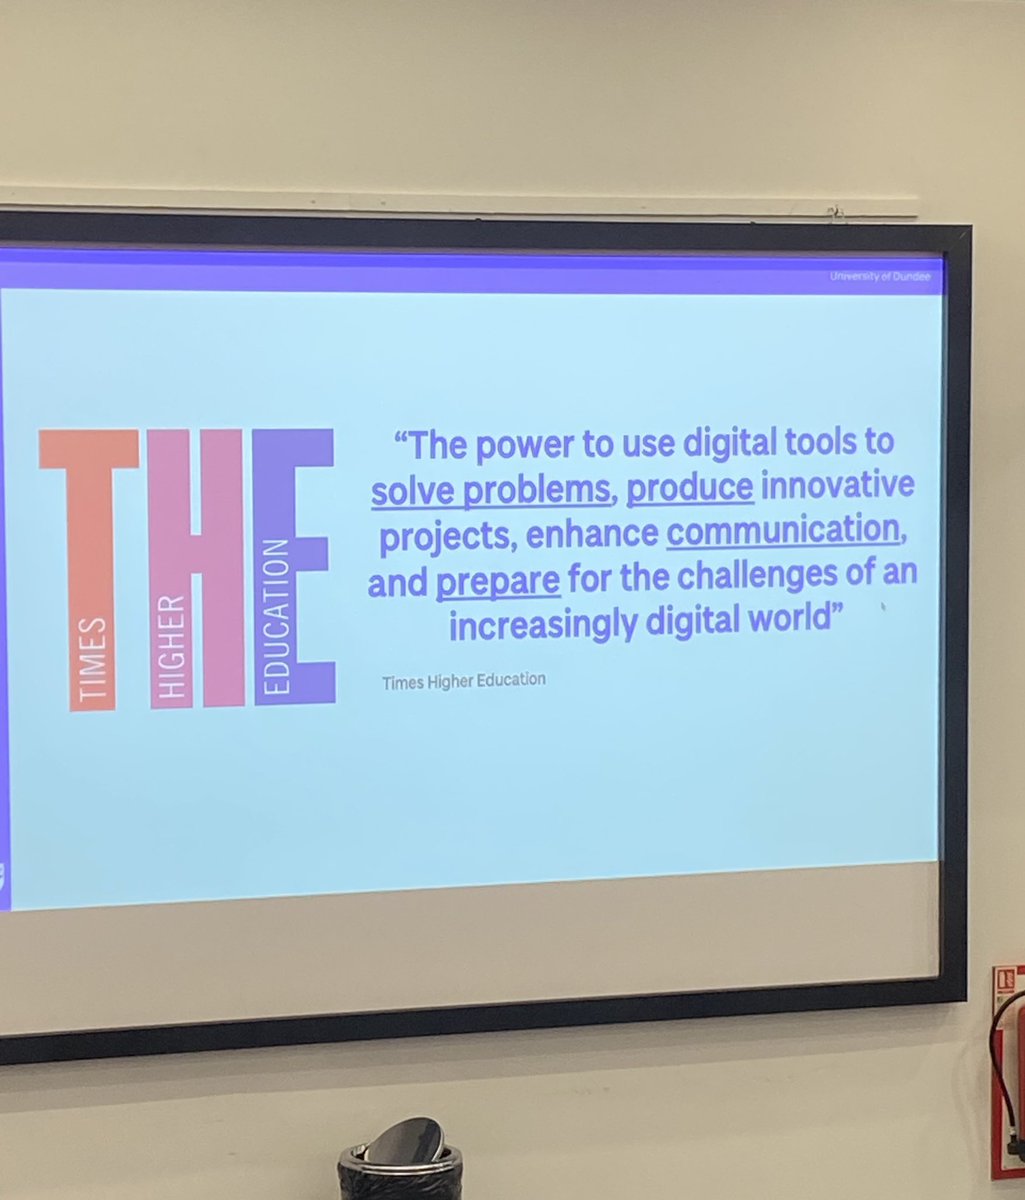 Great session this morning with lots of useful about Digital Literacy and computing science.
#TRICDigiFest #digitalsociety @DigiLearnScot @PKCDigSkills